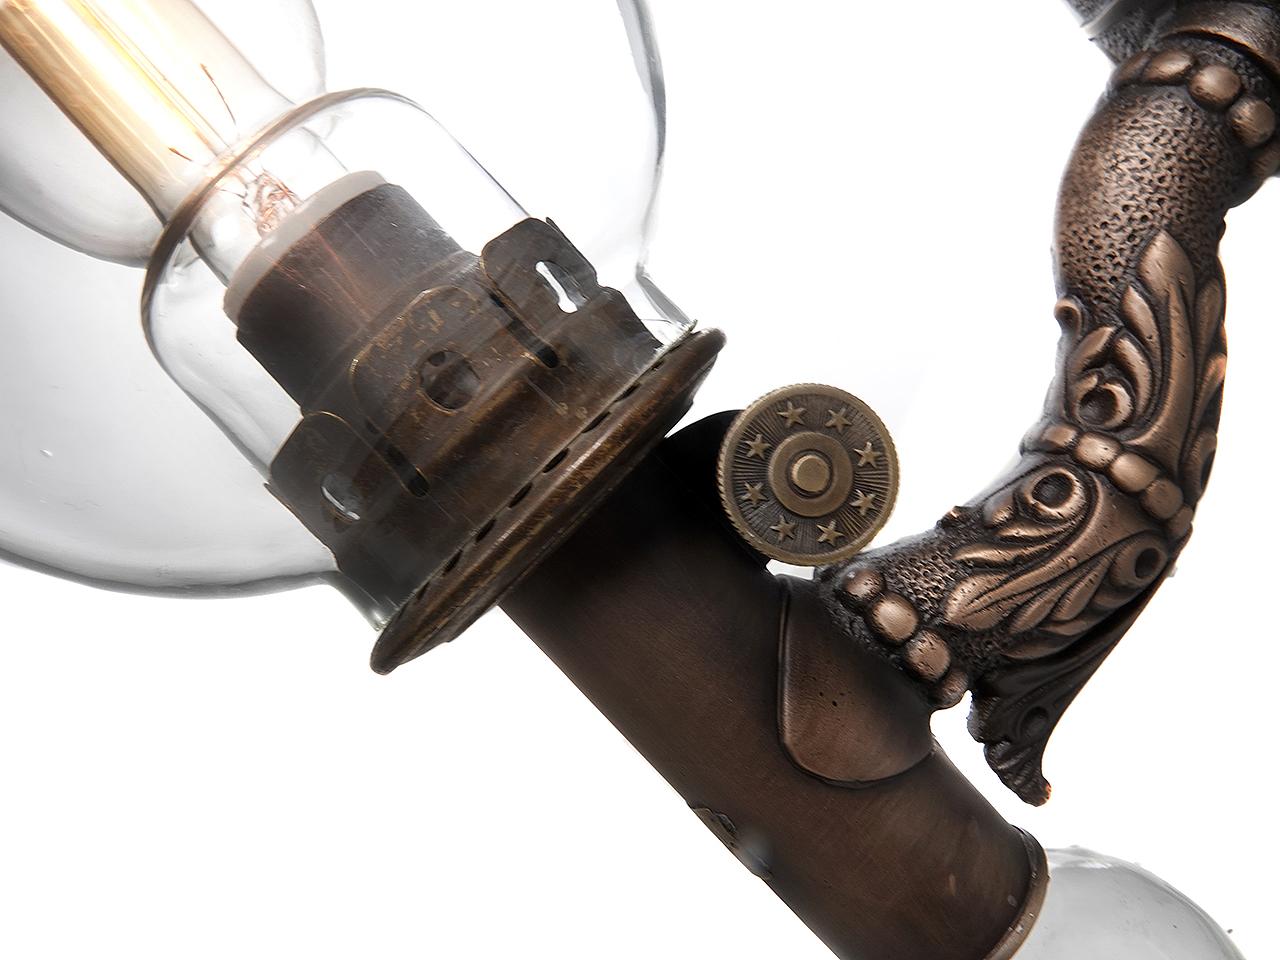 Few of these luxury class Victorian RR lamps still exist. Any remaining examples have found their way into museums and RR car restorations. 
It started with two original bronze Dayton lamp castings. We then redesigned wired the kerosene fuled lamps